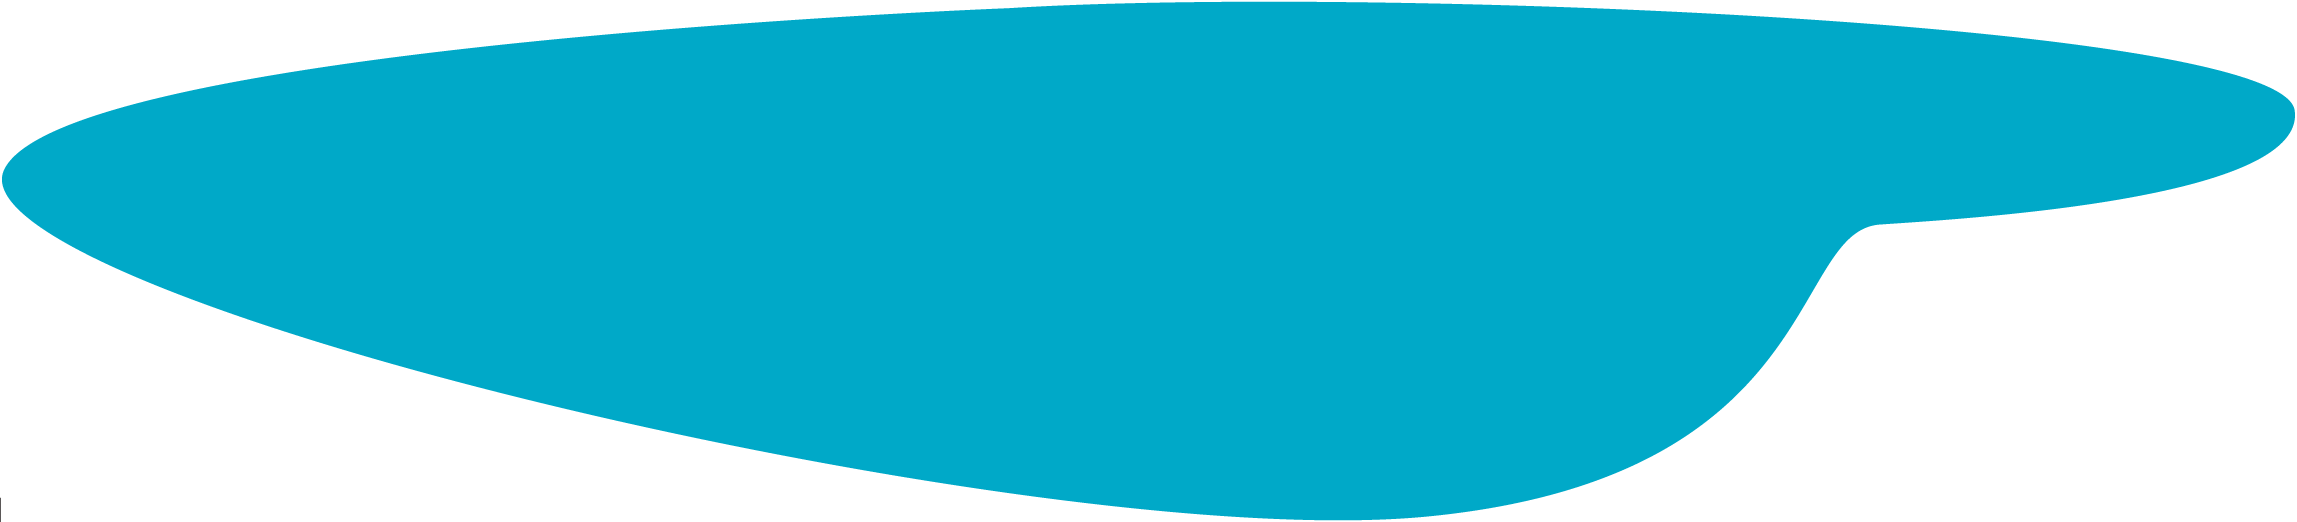 A Blue Rectangular Object With Black Border